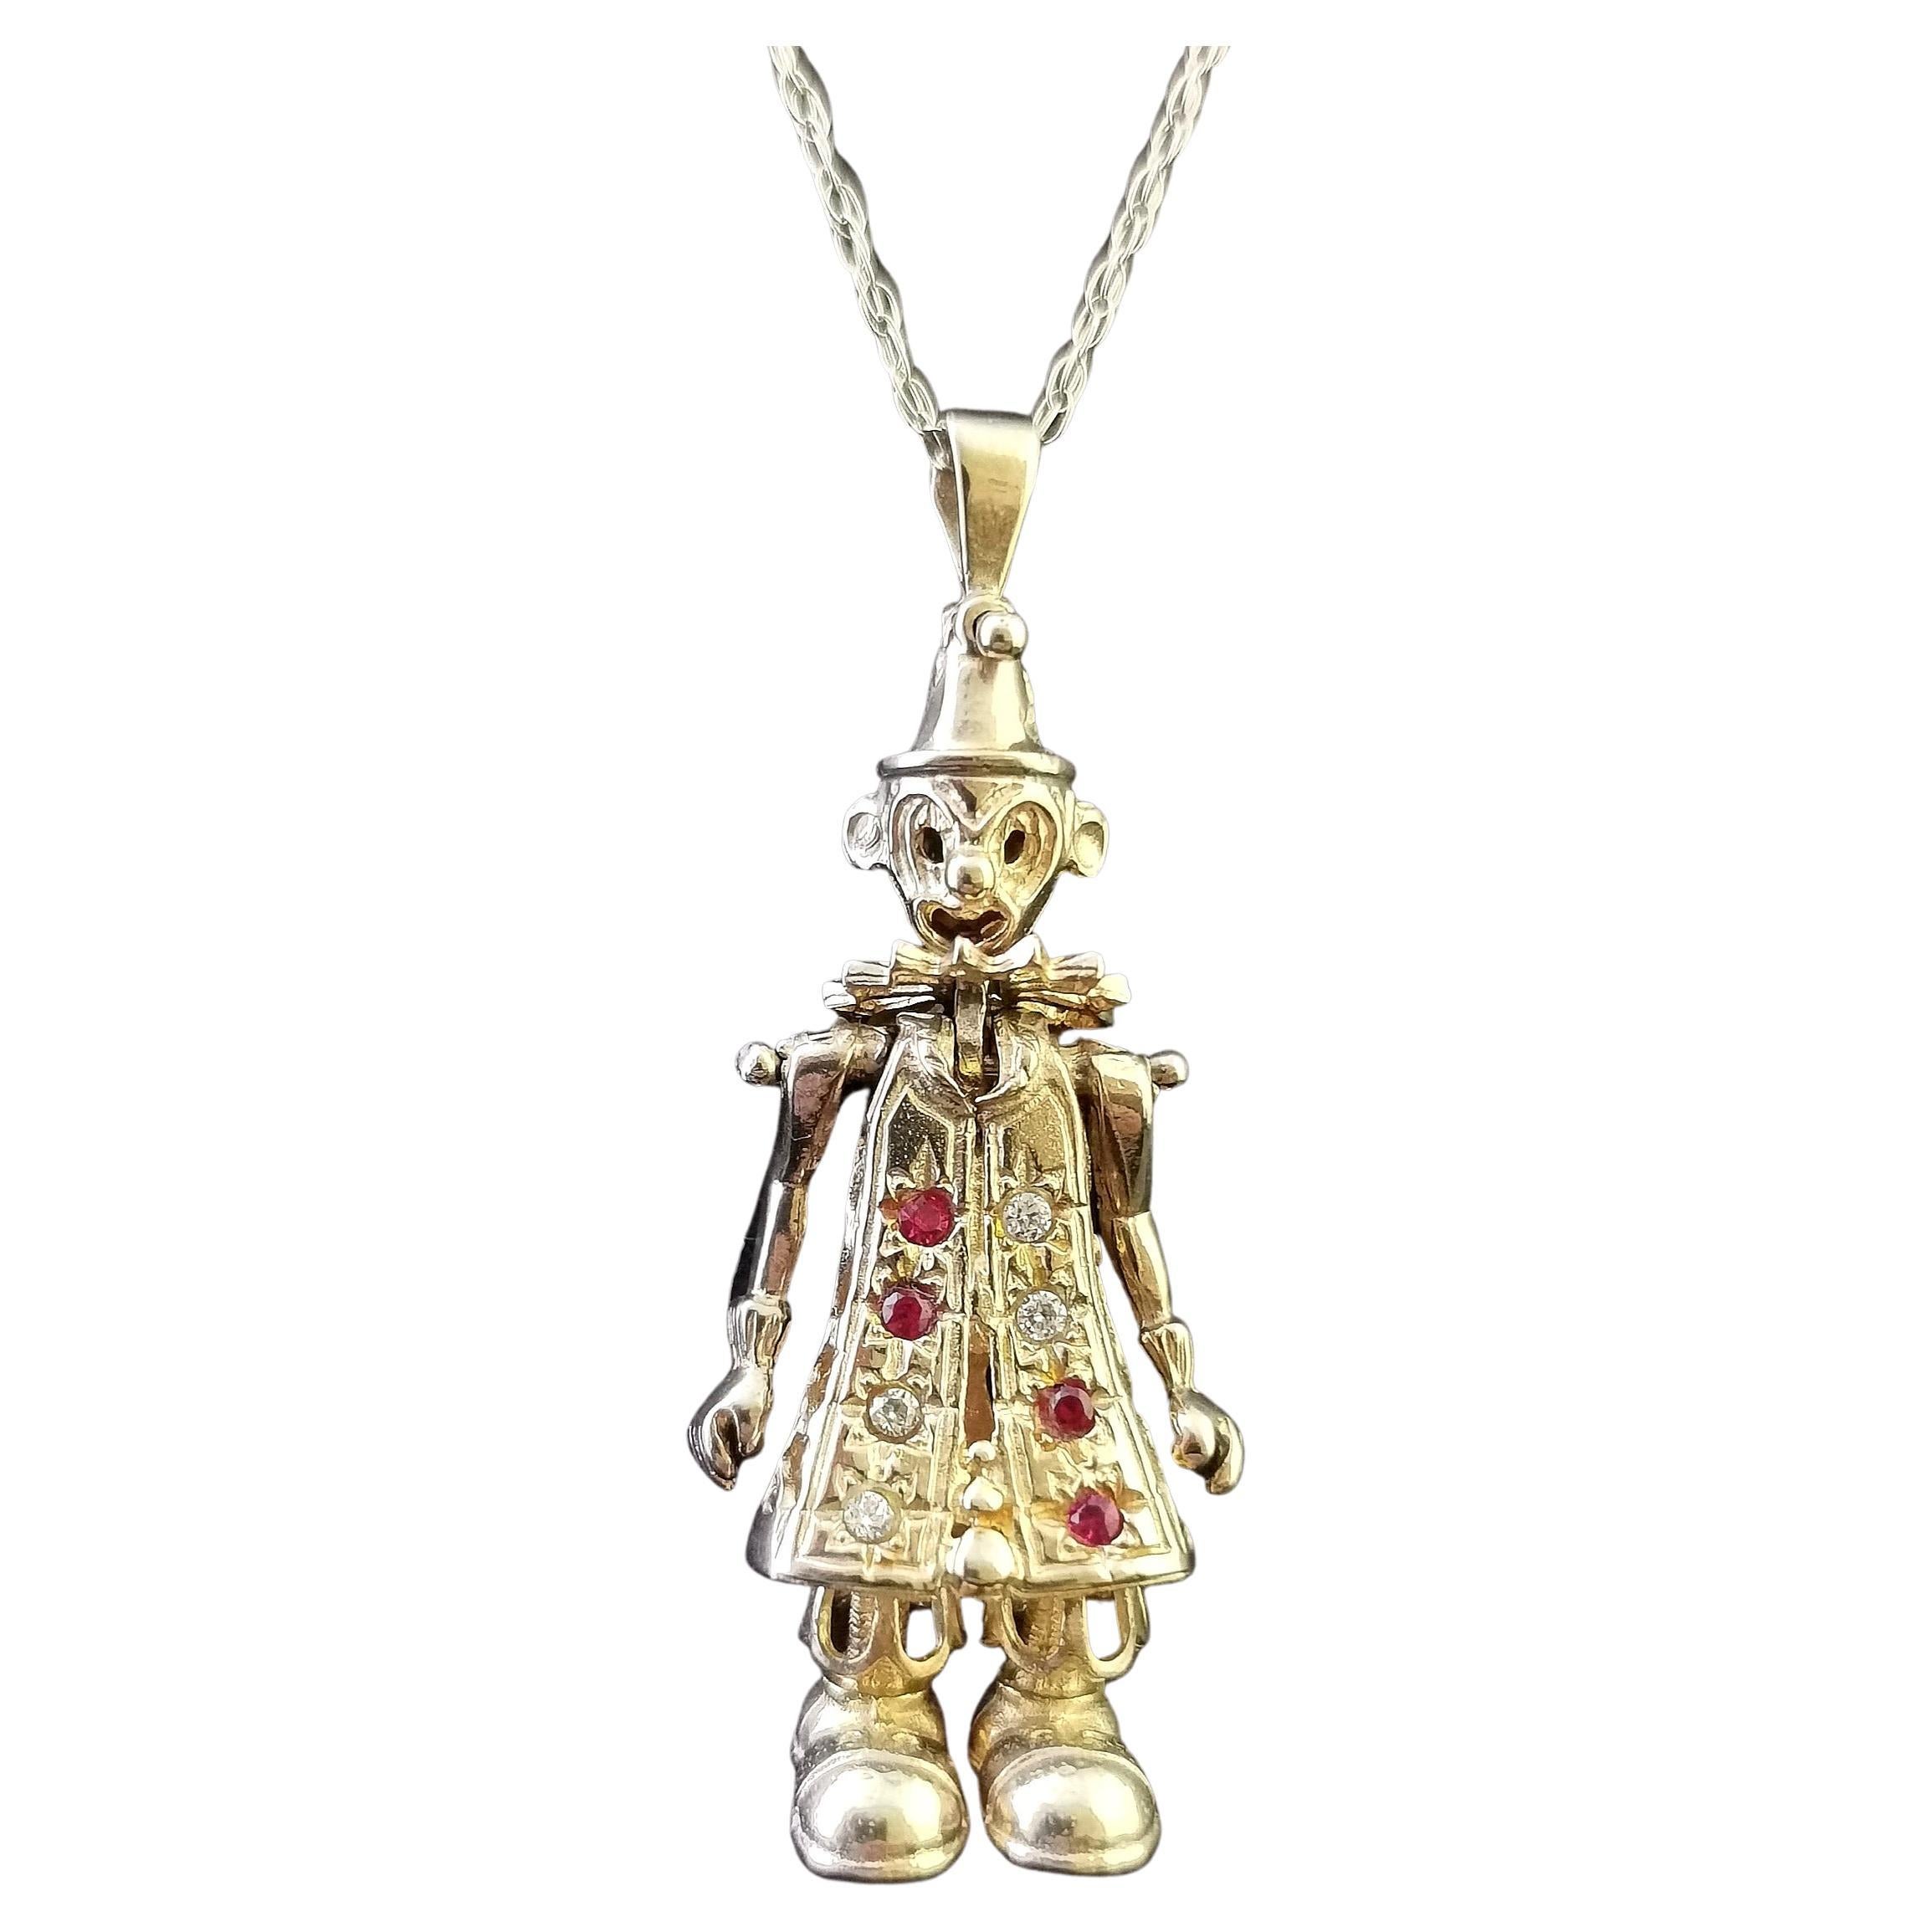 Vintage 9 Karat Yellow Gold Clown Pendant, Trace Link Necklace, Articulated